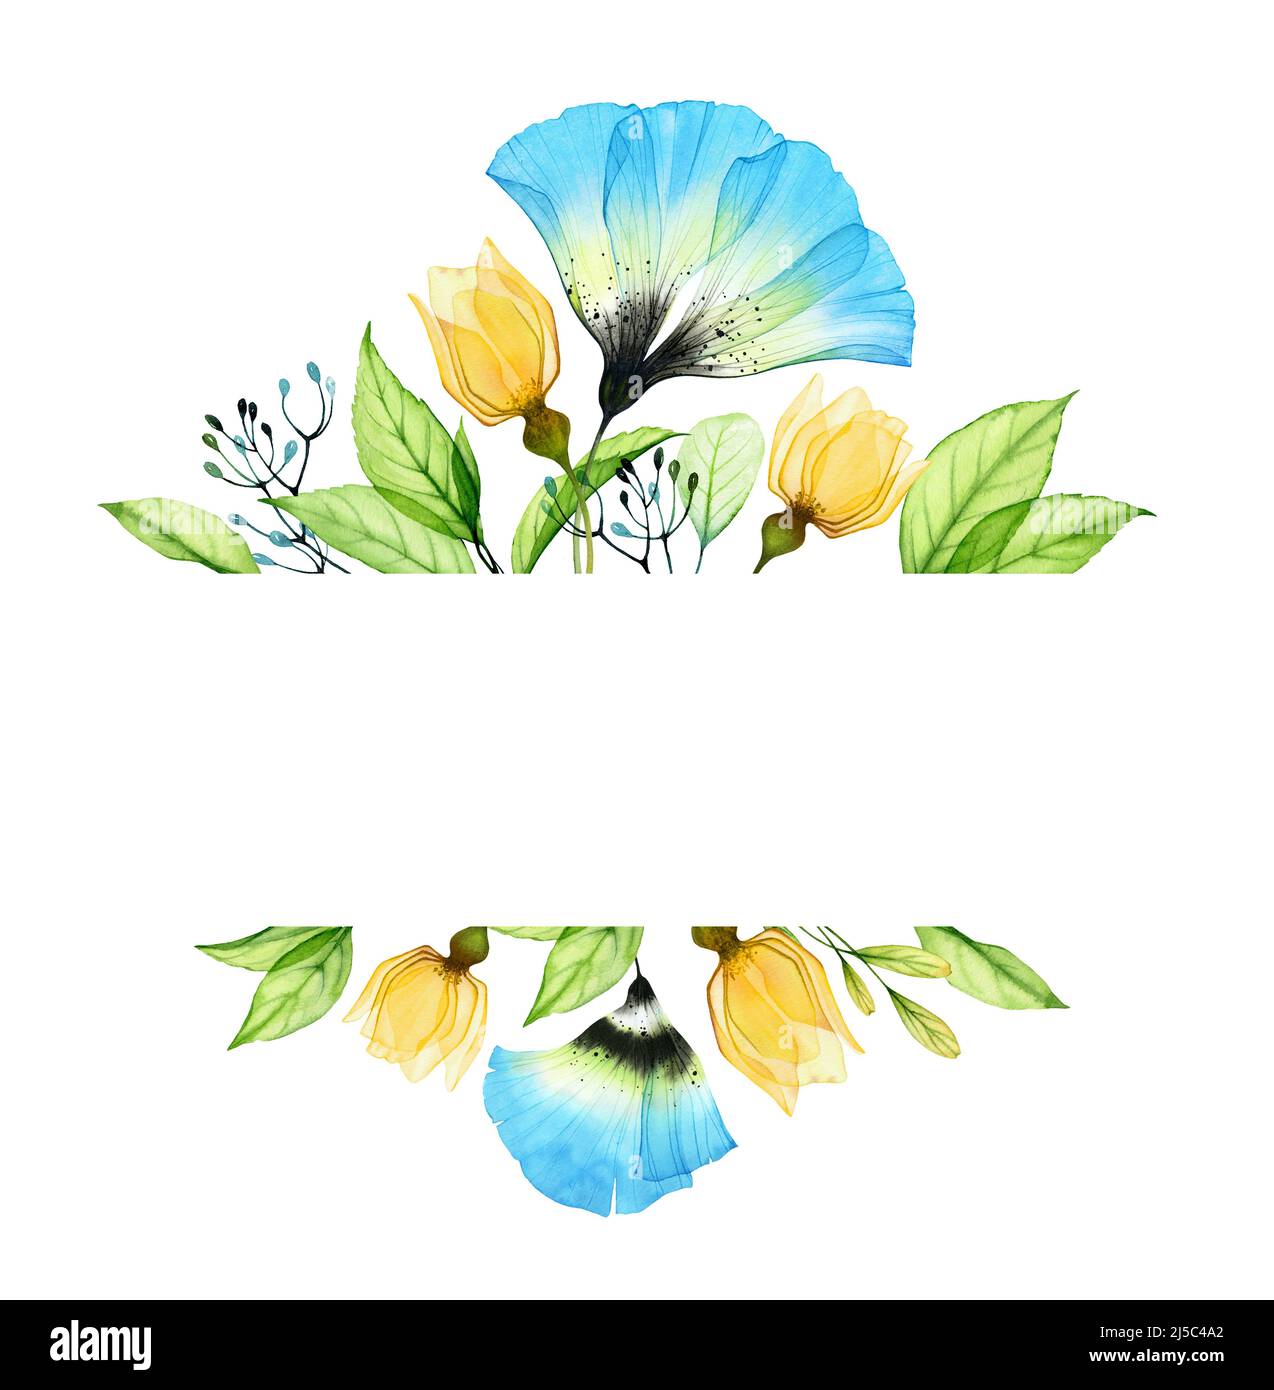 Watercolor floral composition with yellow roses and blue anemone. Abstract banner with Ukrainian flowers and leaves. Place for custom text. Hand Stock Photo